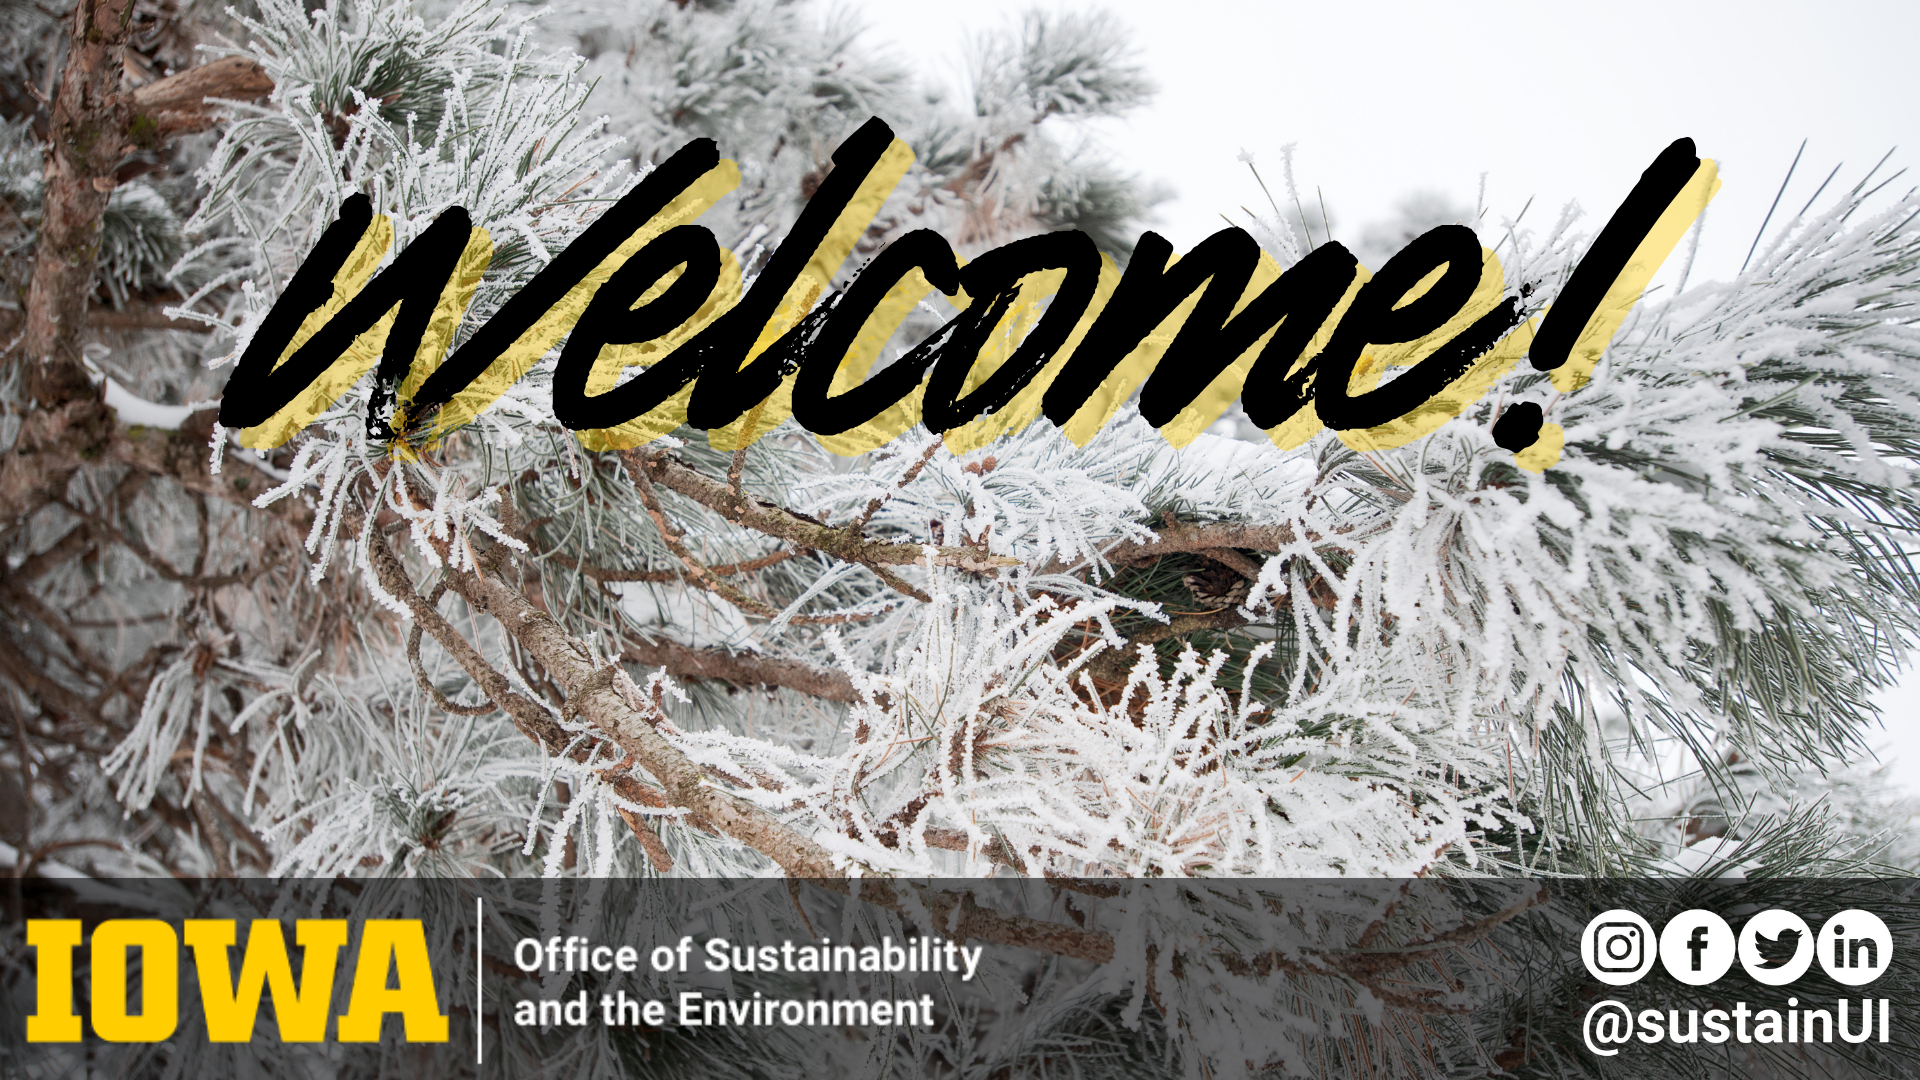 Welcome to the Office of Sustainability